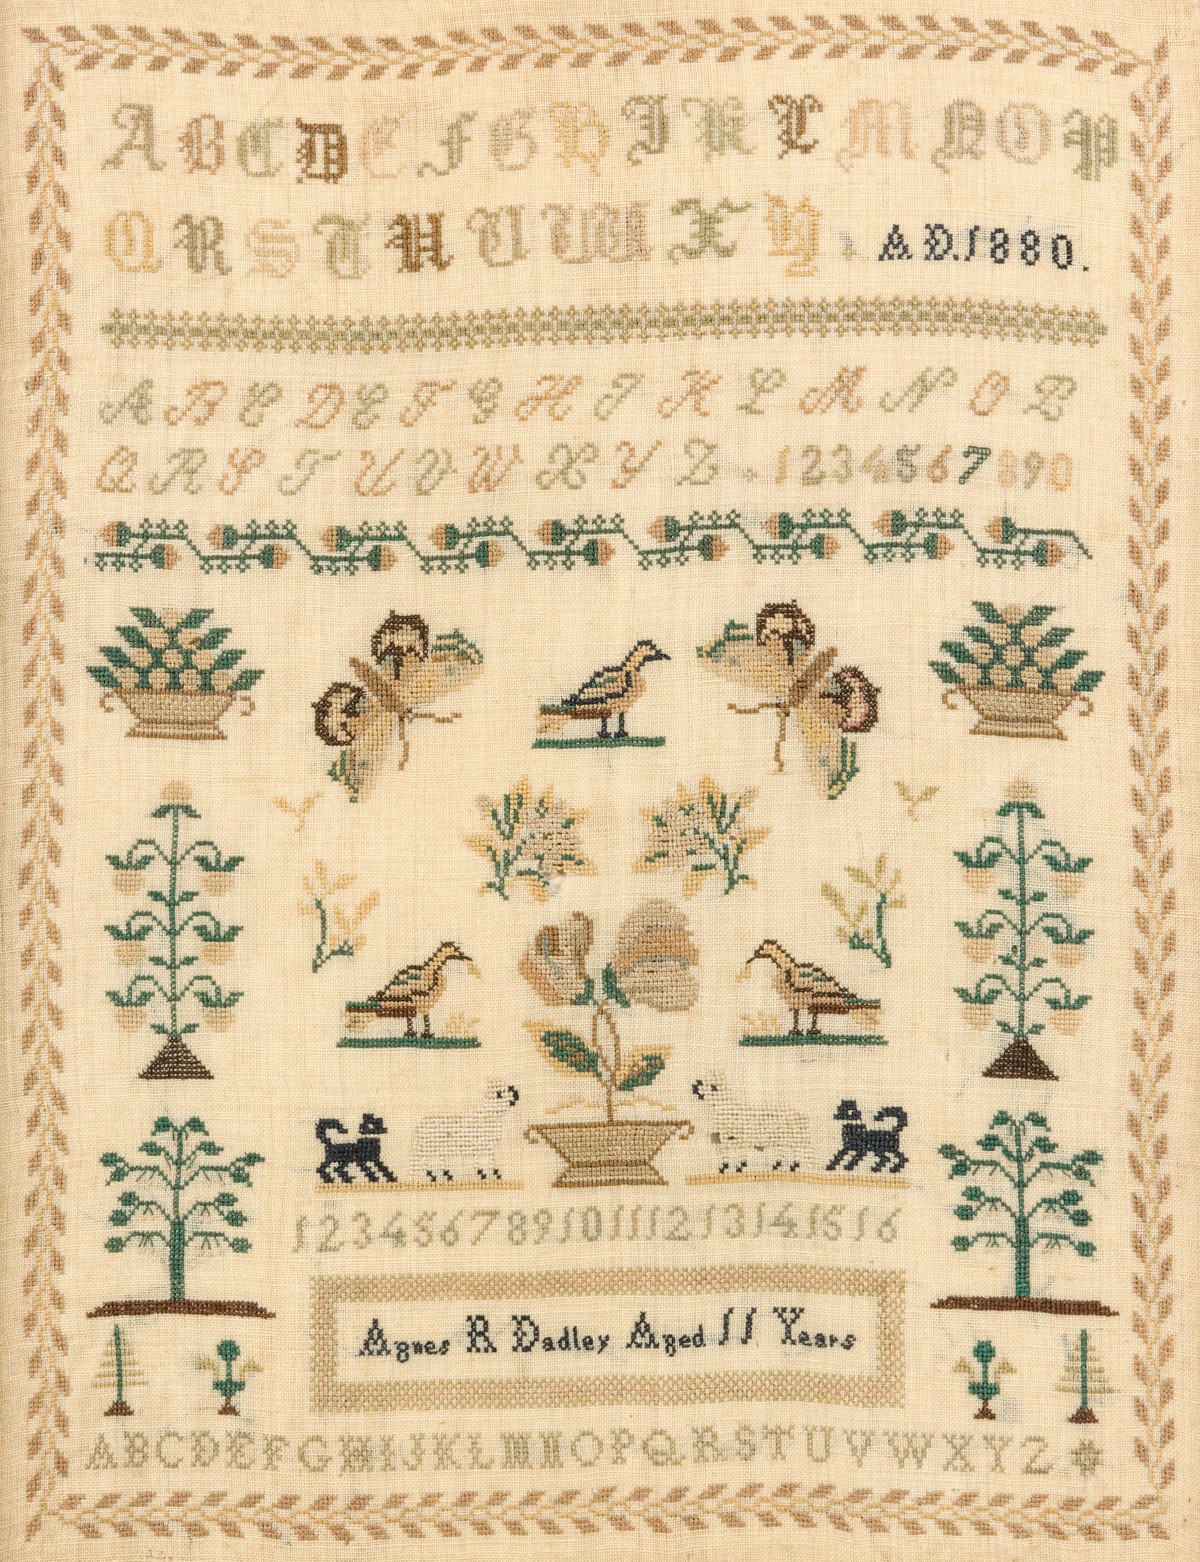 THE 1880 CROSS STITCH SAMPLER OF AGNES DADLEY, AGE 11